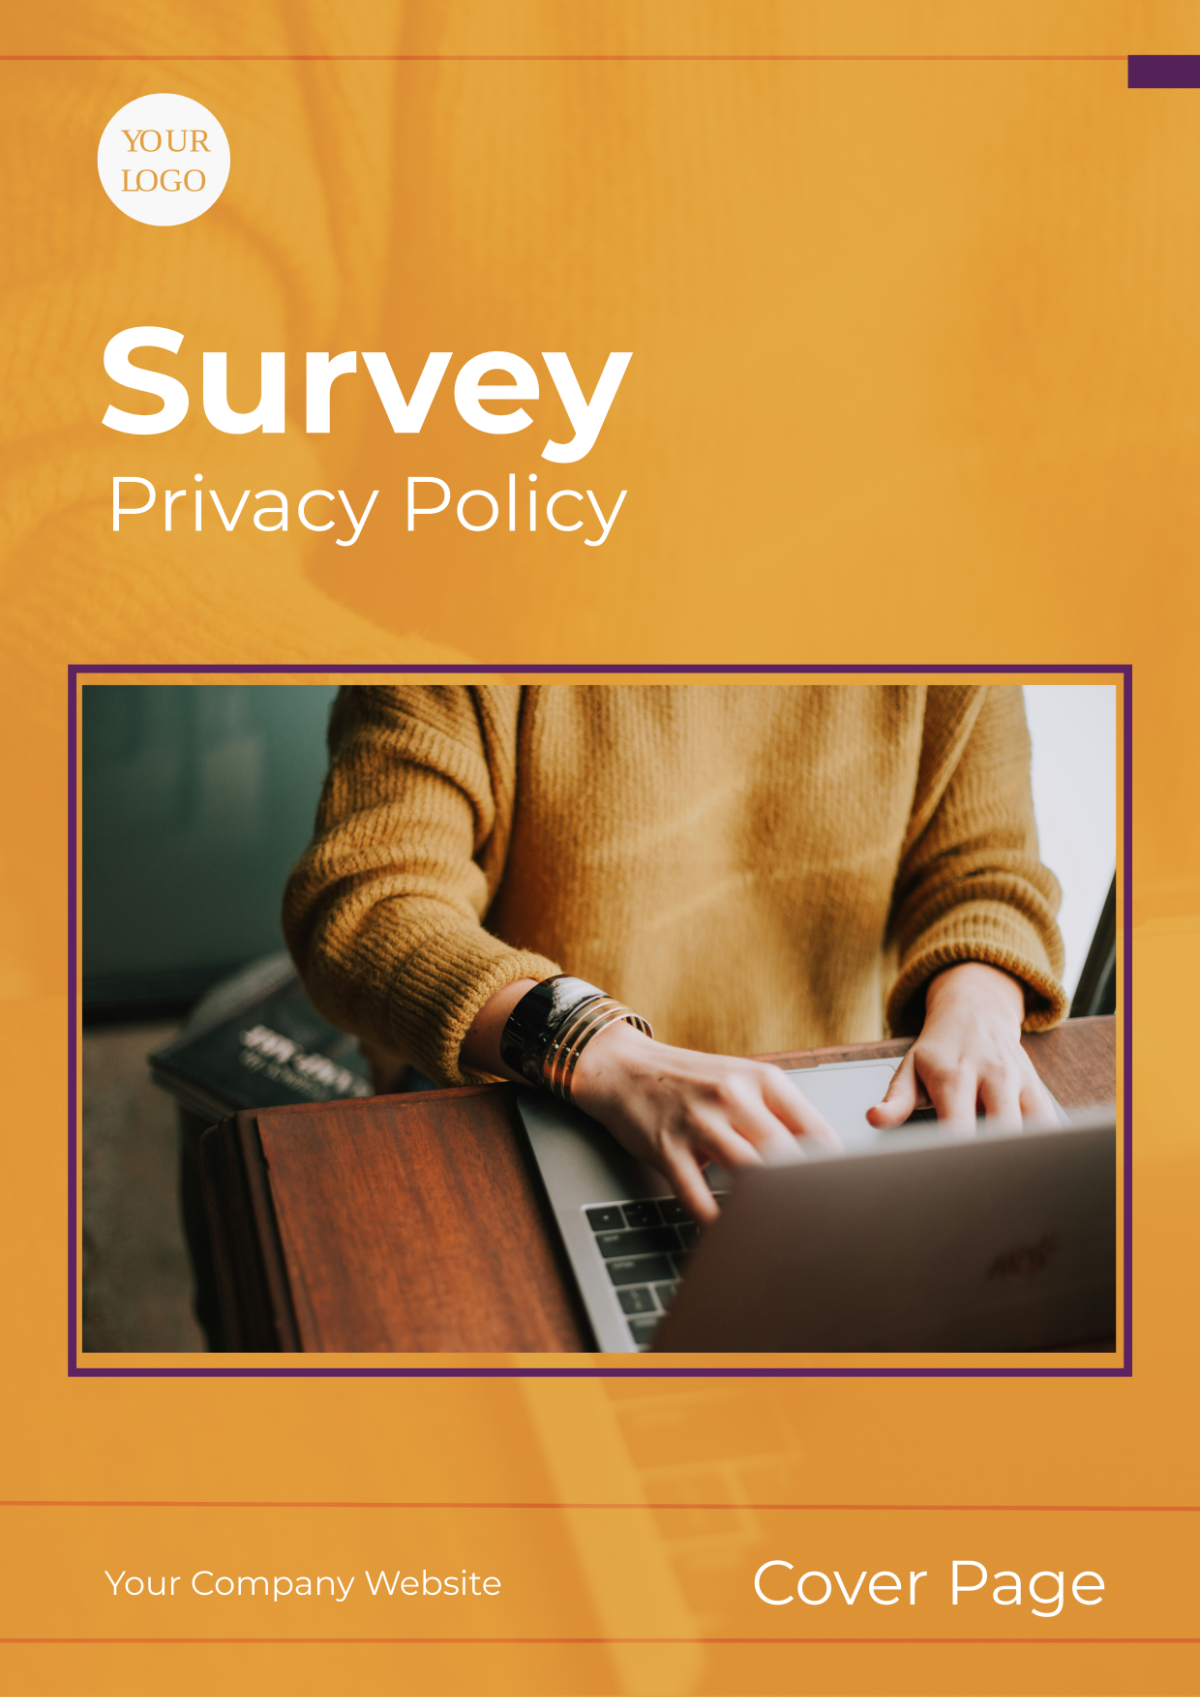 Survey Privacy Policy Cover Page